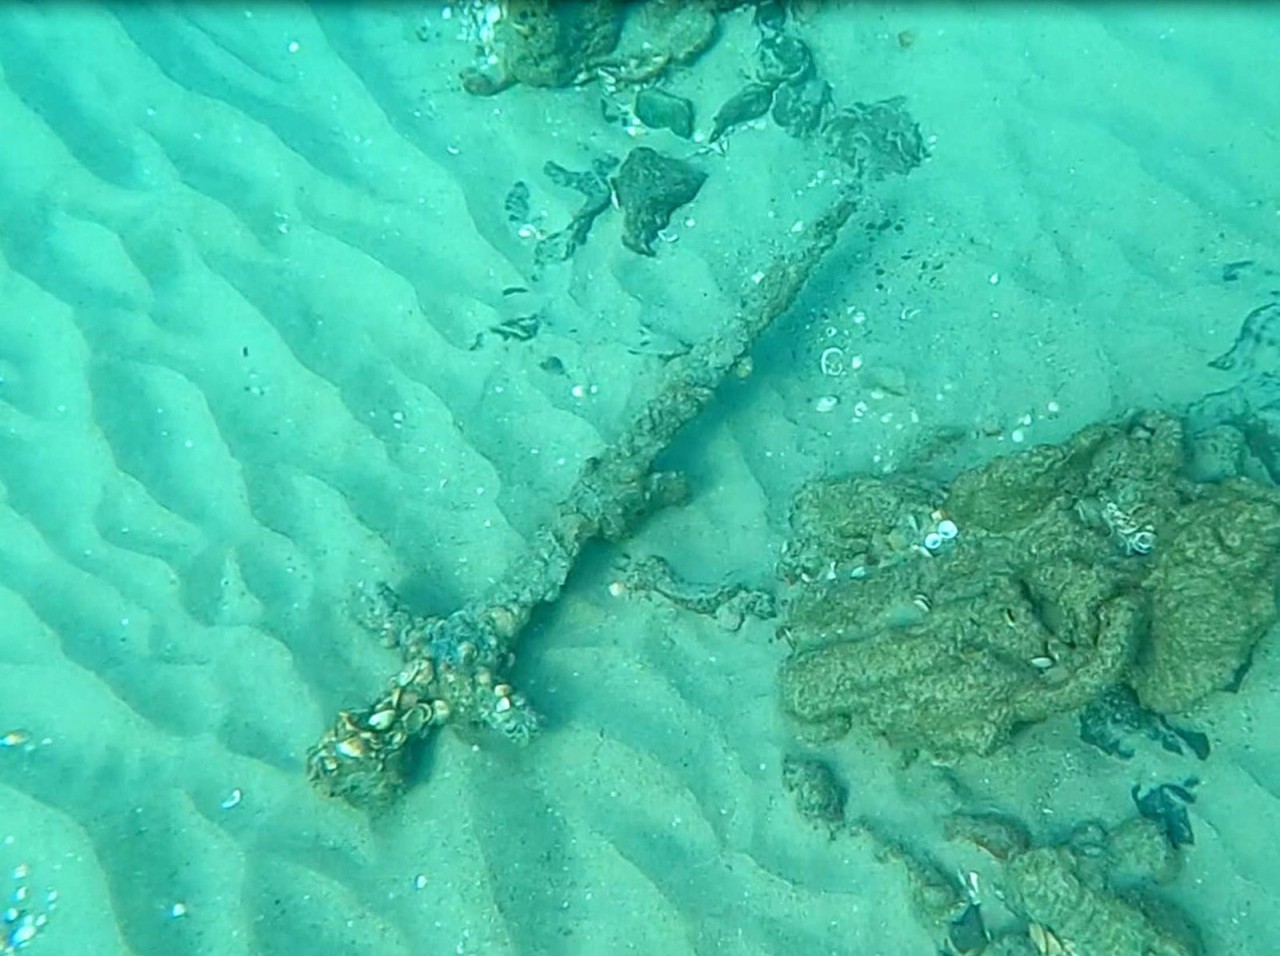 Diver Discovers 900-Year-Old Crusader Sword Off Israel's Coast